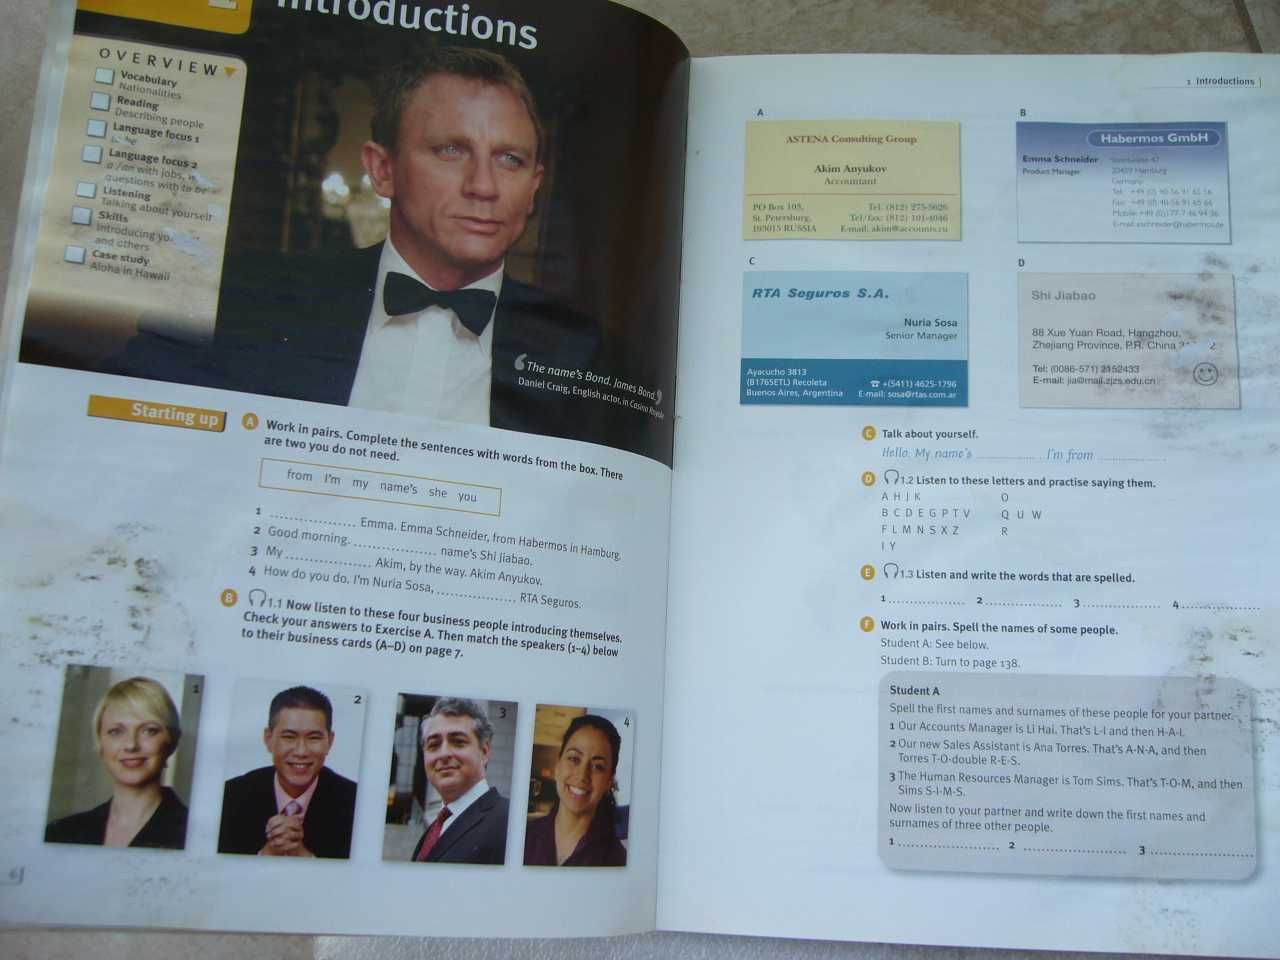 Market Leader, Elementary business english course book